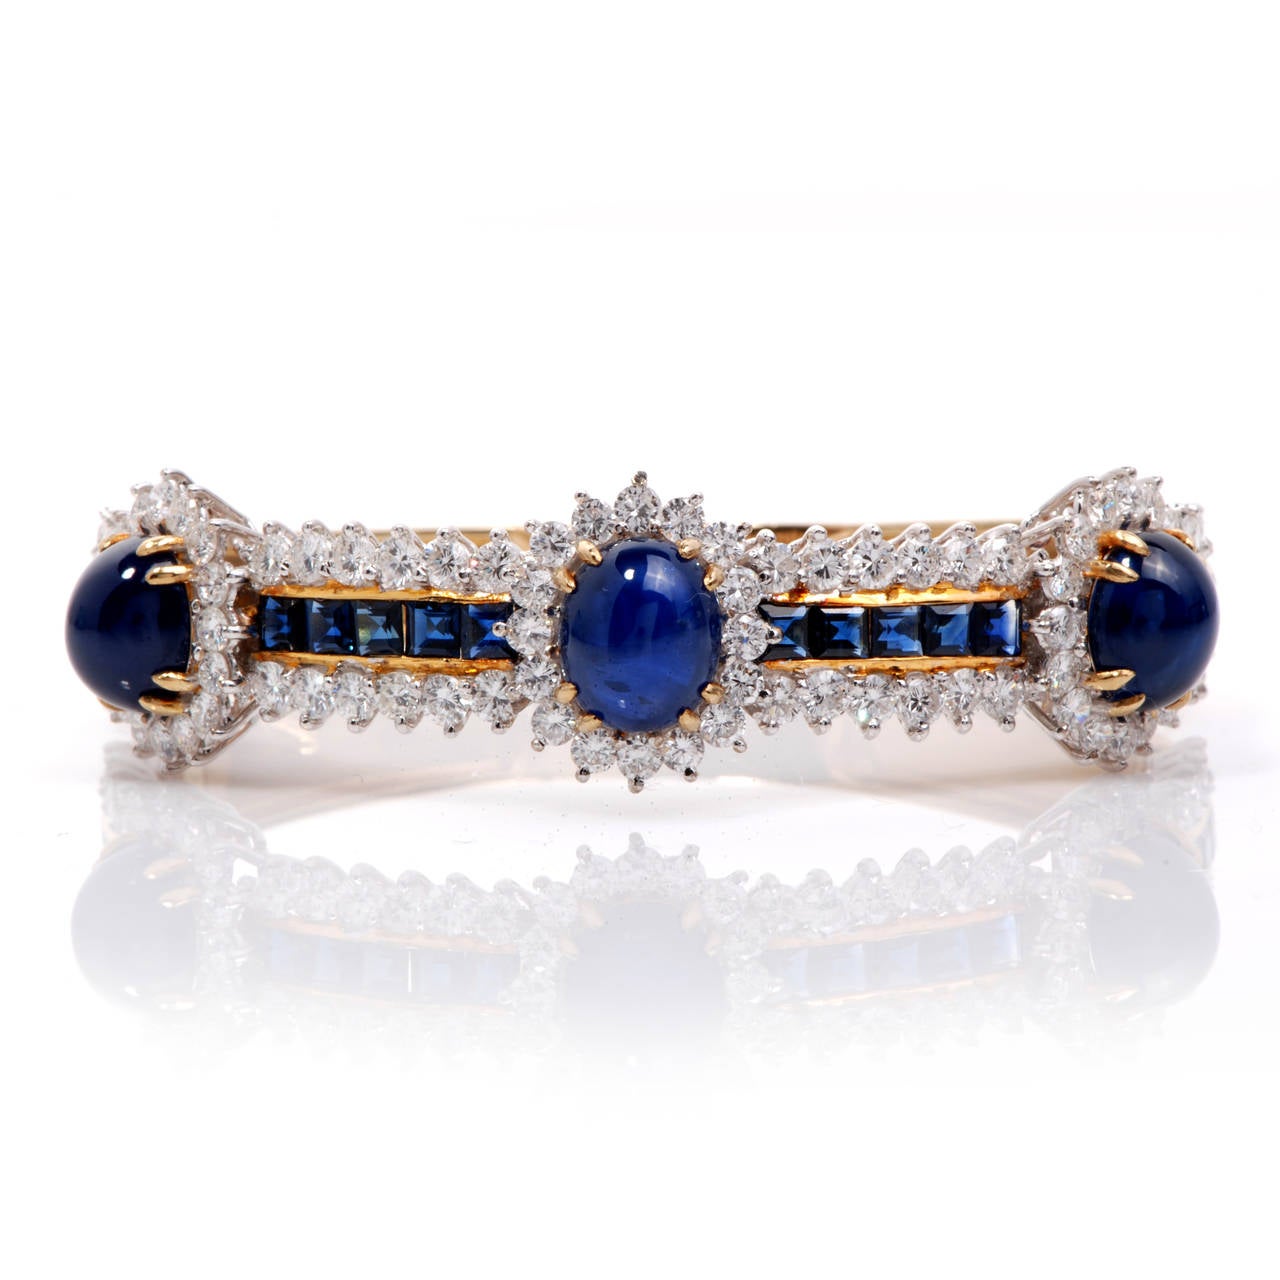 This stunning and elegant sapphire bangle bracelet is finely crafted in solid 18K yellow and 18k white gold. This glamorous bracelet is accented with 82 brilliant genuine round cut diamonds approx. 5.25 ct, G color, VS clarity. Topped with  3 oval